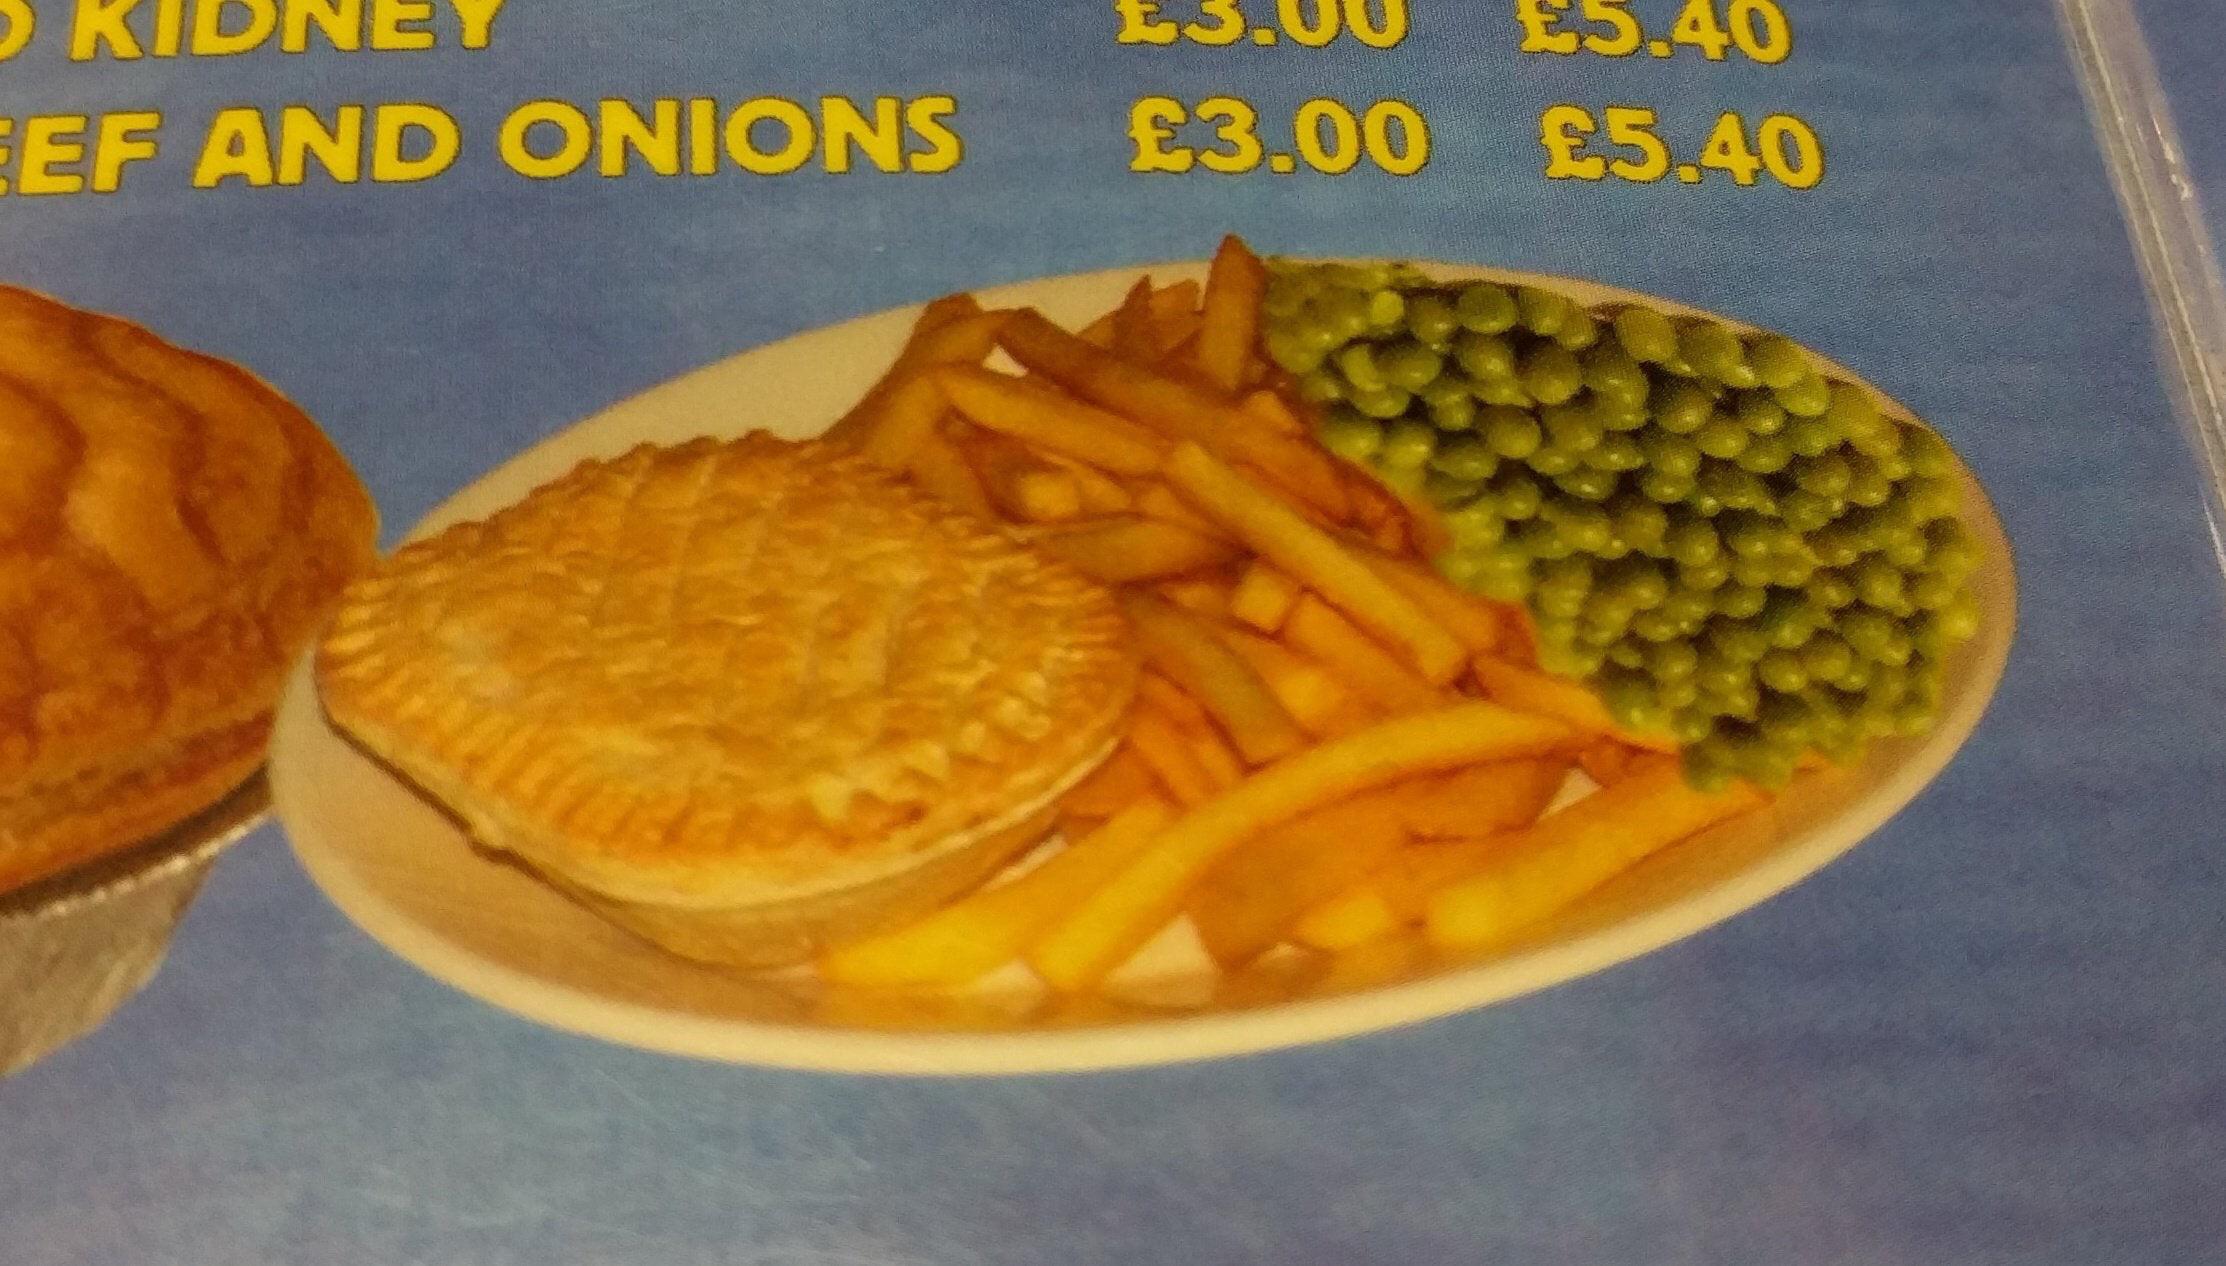 The+peas+on+this+poster+are+upsidedown.